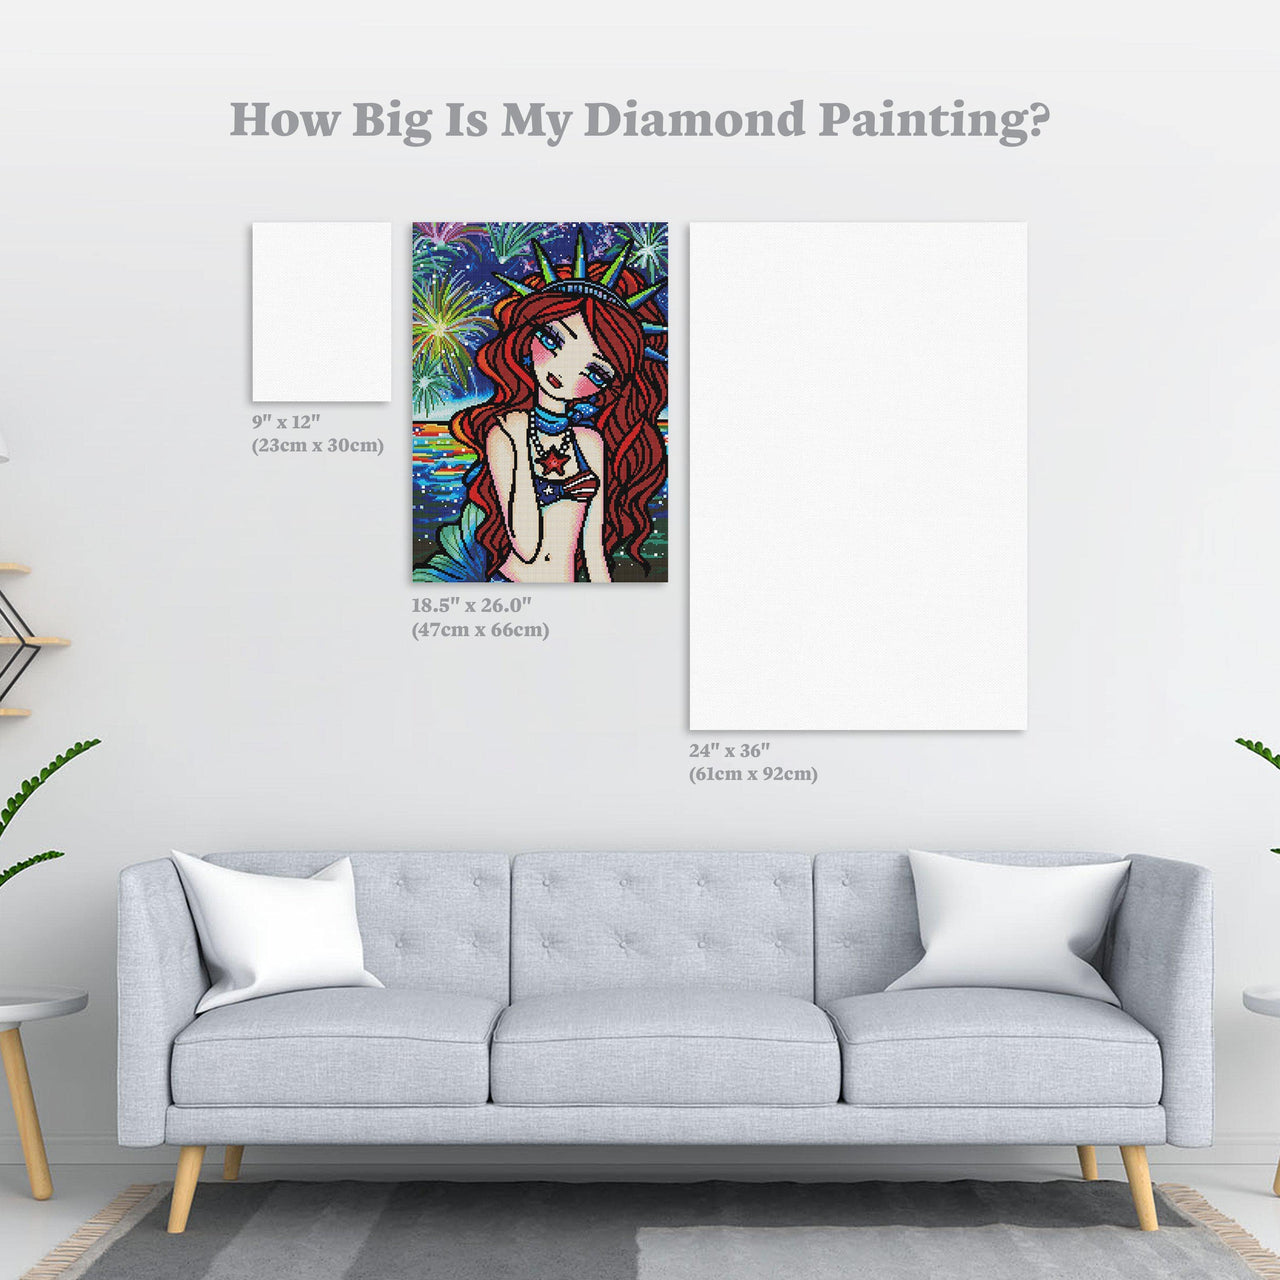 Diamond Painting Lady Liberty 18.5" x 26.0″ (47cm x 66cm) / Round With 44 Colors Including 3 ABs / 38,844